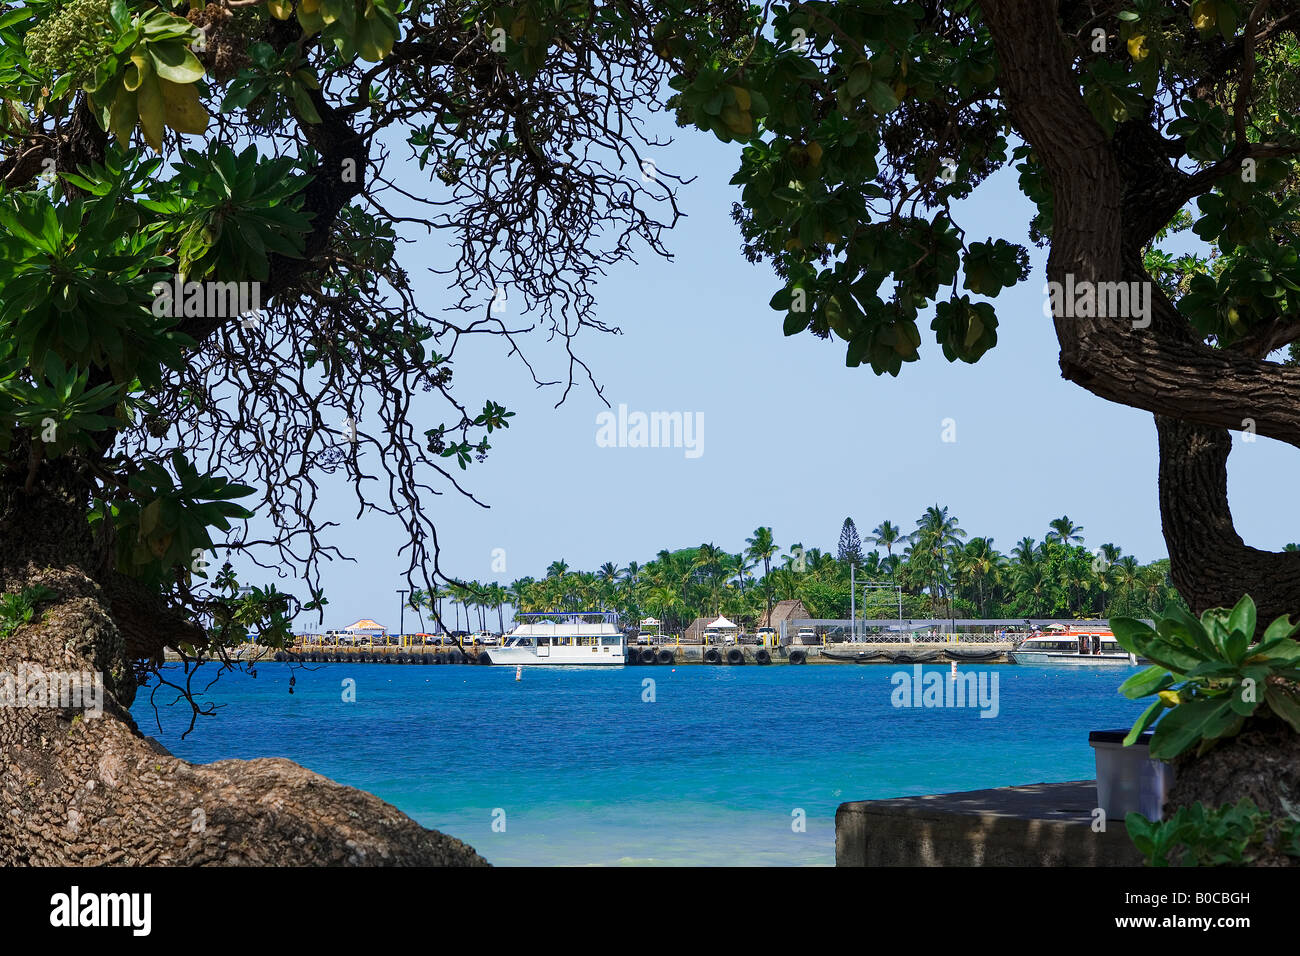 Image looking through a pair of tree trunks out across Kailua Bay toward the downtown dock areas and tourist ships Stock Photo